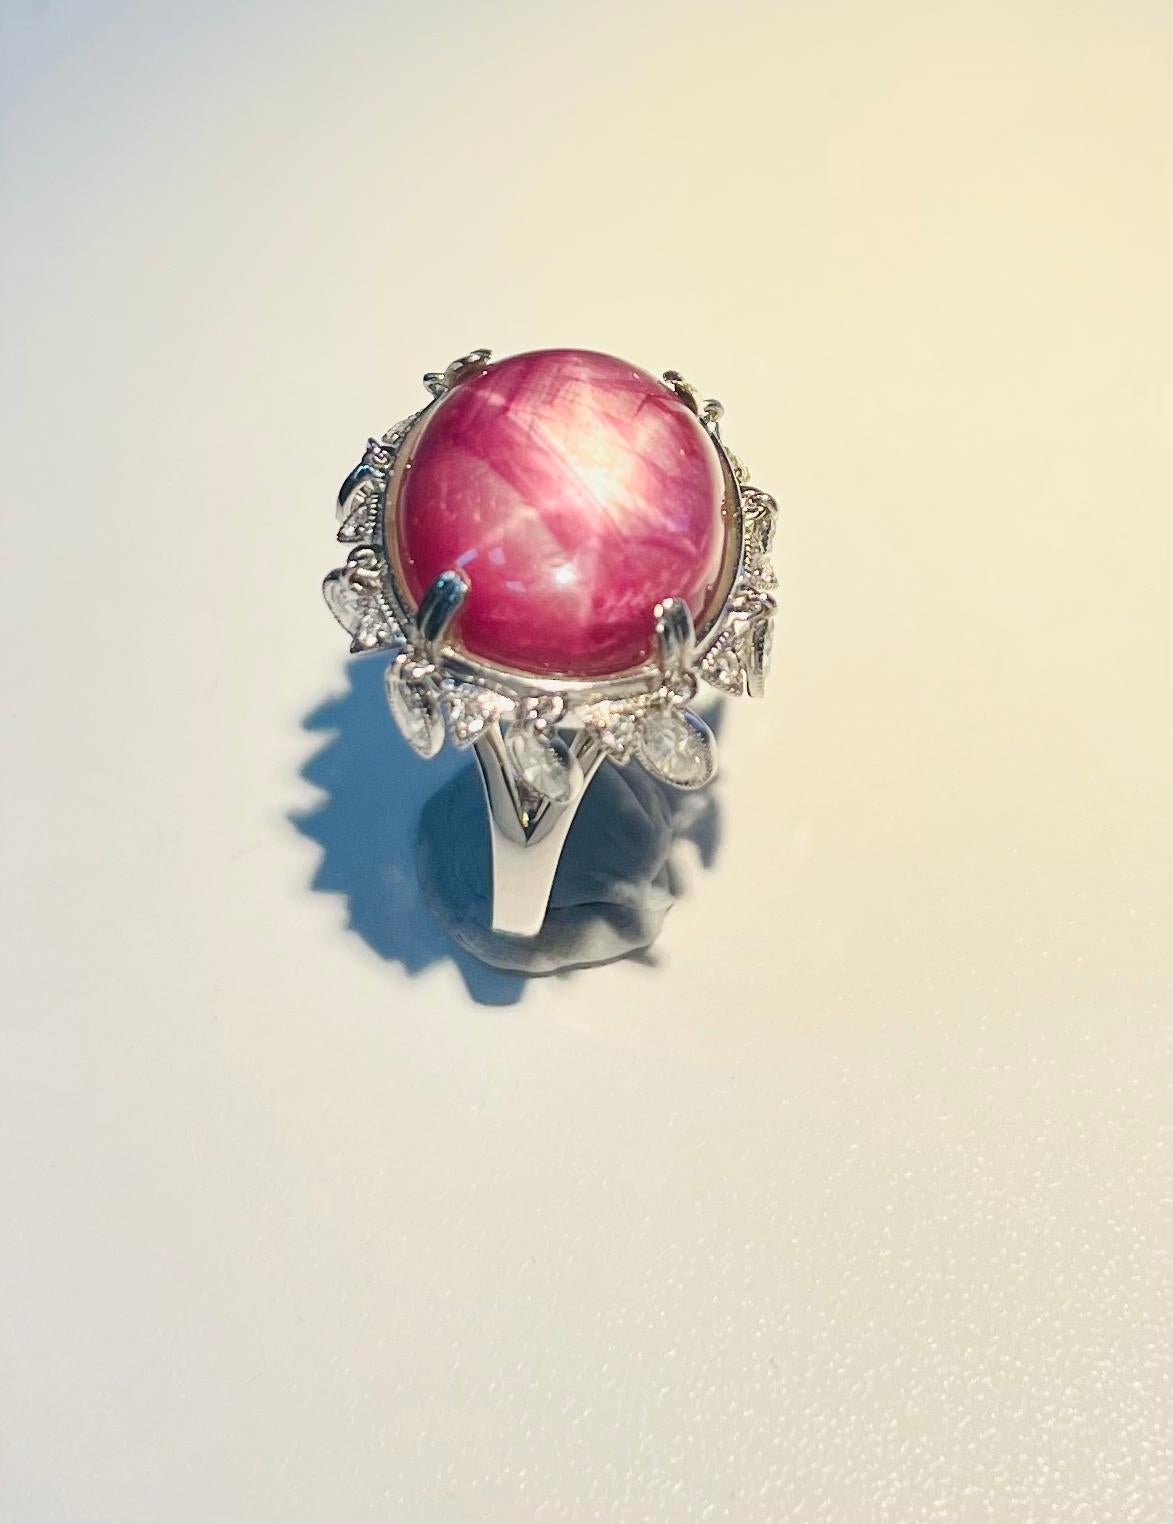 Extremely Rare Natural Star Ruby 20.68 ct 18k 2.06 ct Diamond Art Deco Ring

Presenting the extraordinary rarity of an Extremely Rare Natural Star Ruby Ring, boasting a magnificent 20.68 carat star ruby gemstone set in an exquisite Art Deco